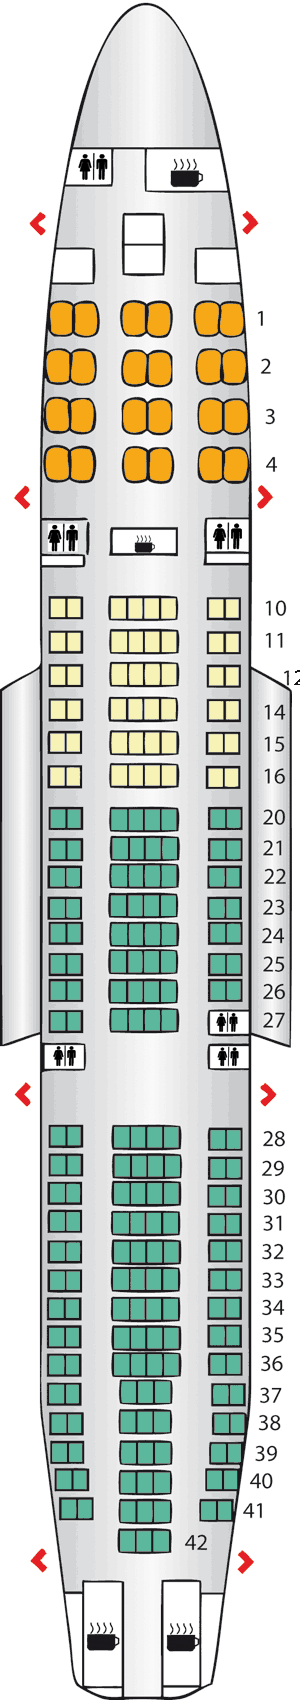 airbus a330 seating plan. Airbus A330-200